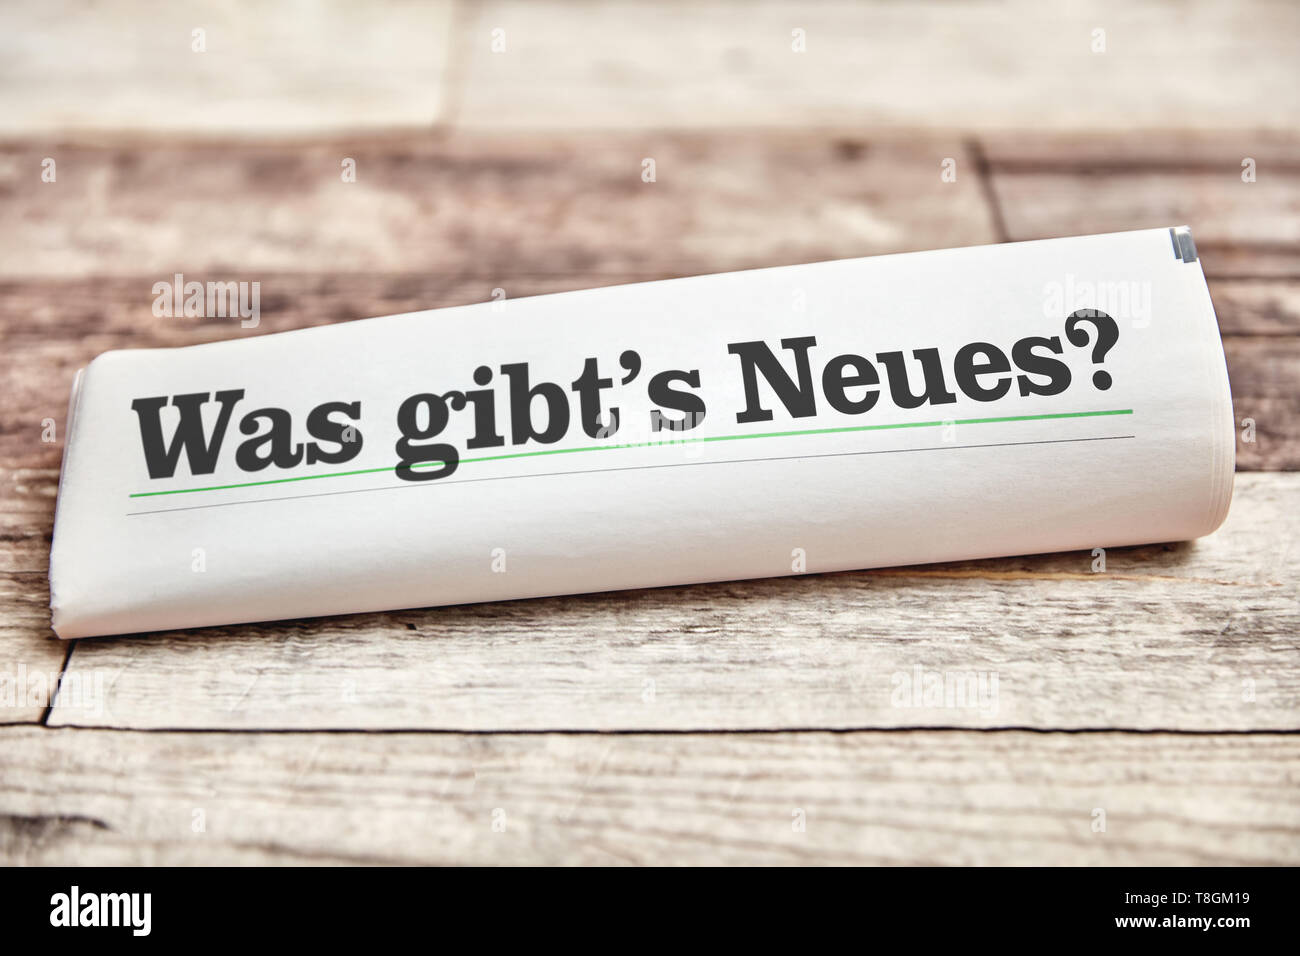 German slogan 'Was gibt's Neues?' (What's new?) is on front page of a folded newspaper on a wooden table Stock Photo